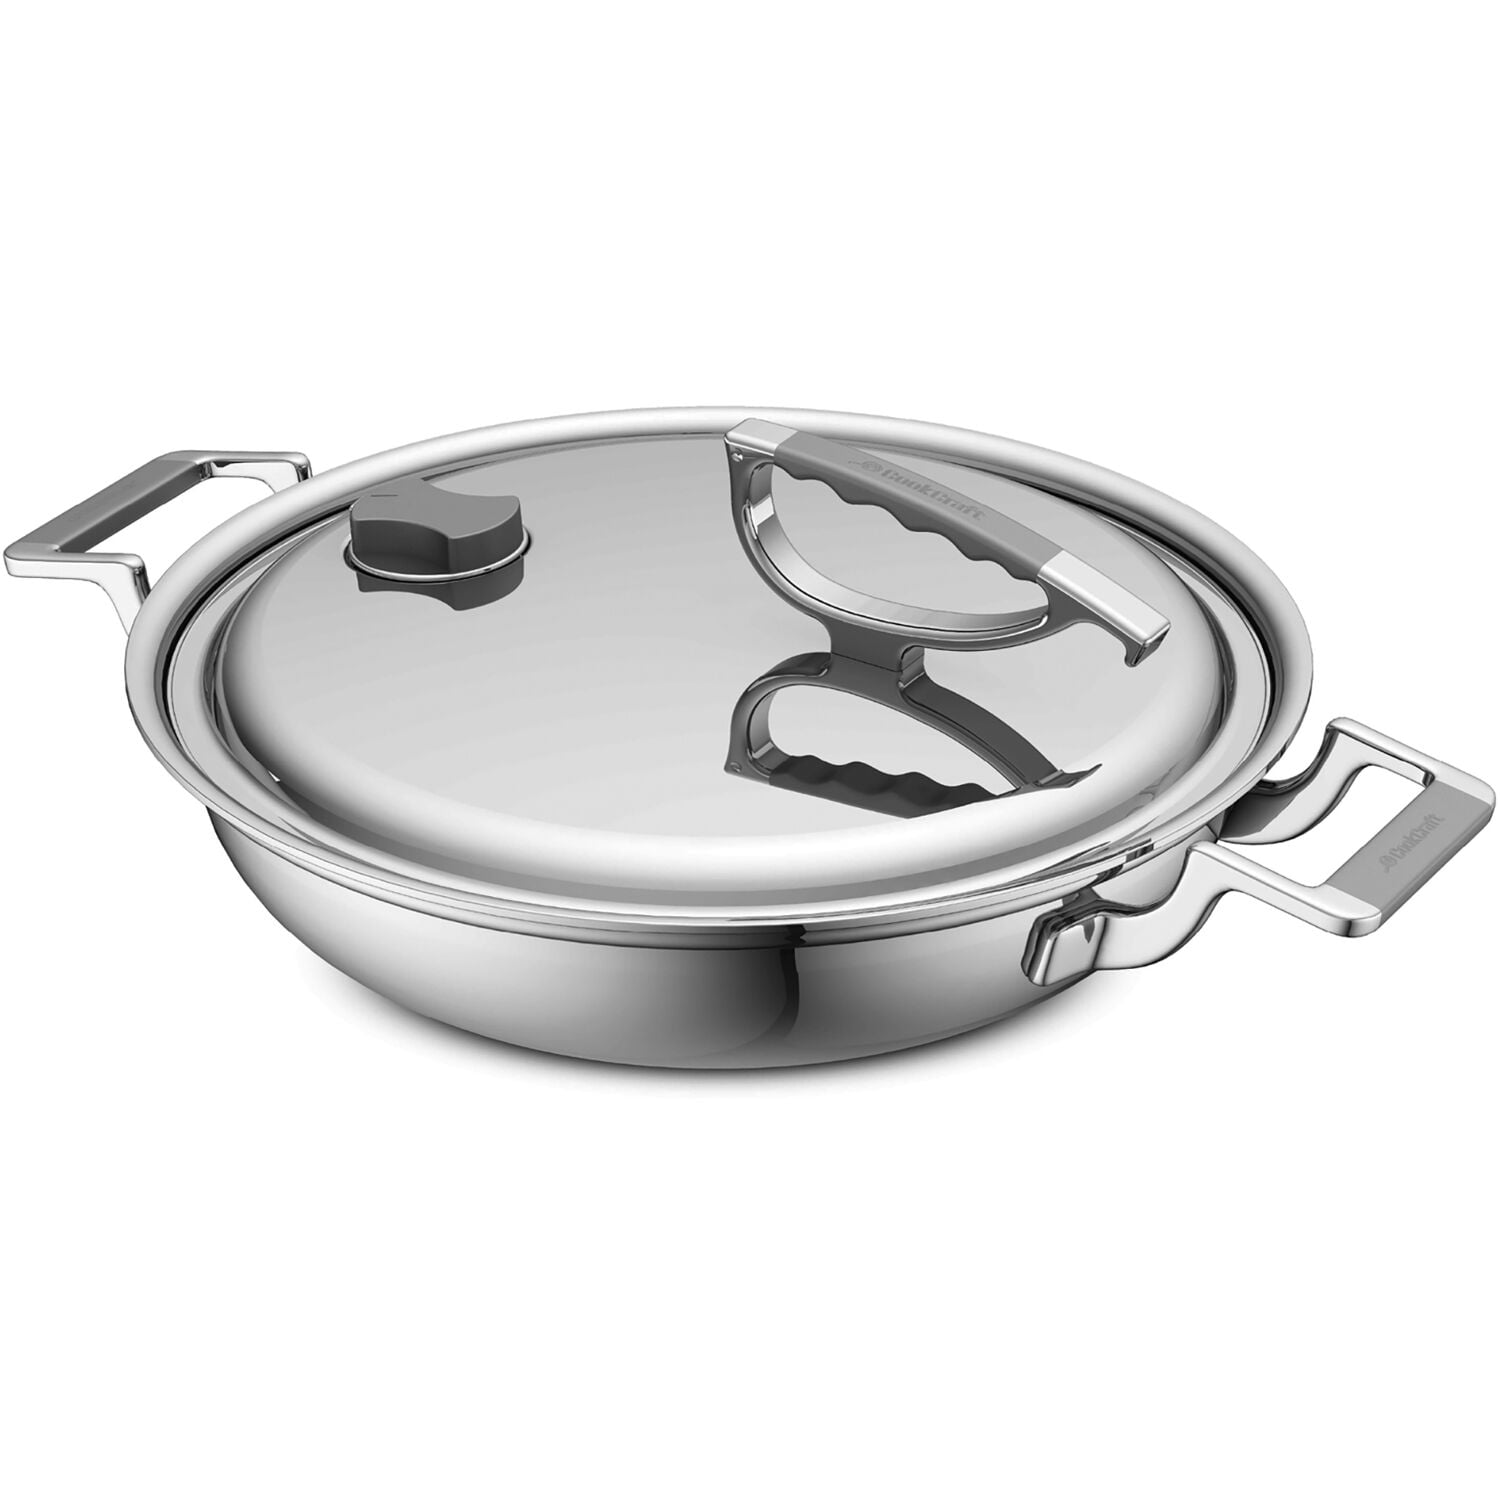 D3 Stainless 3-Ply Bonded Cookware Mini Casserole with Lid 1 Quart